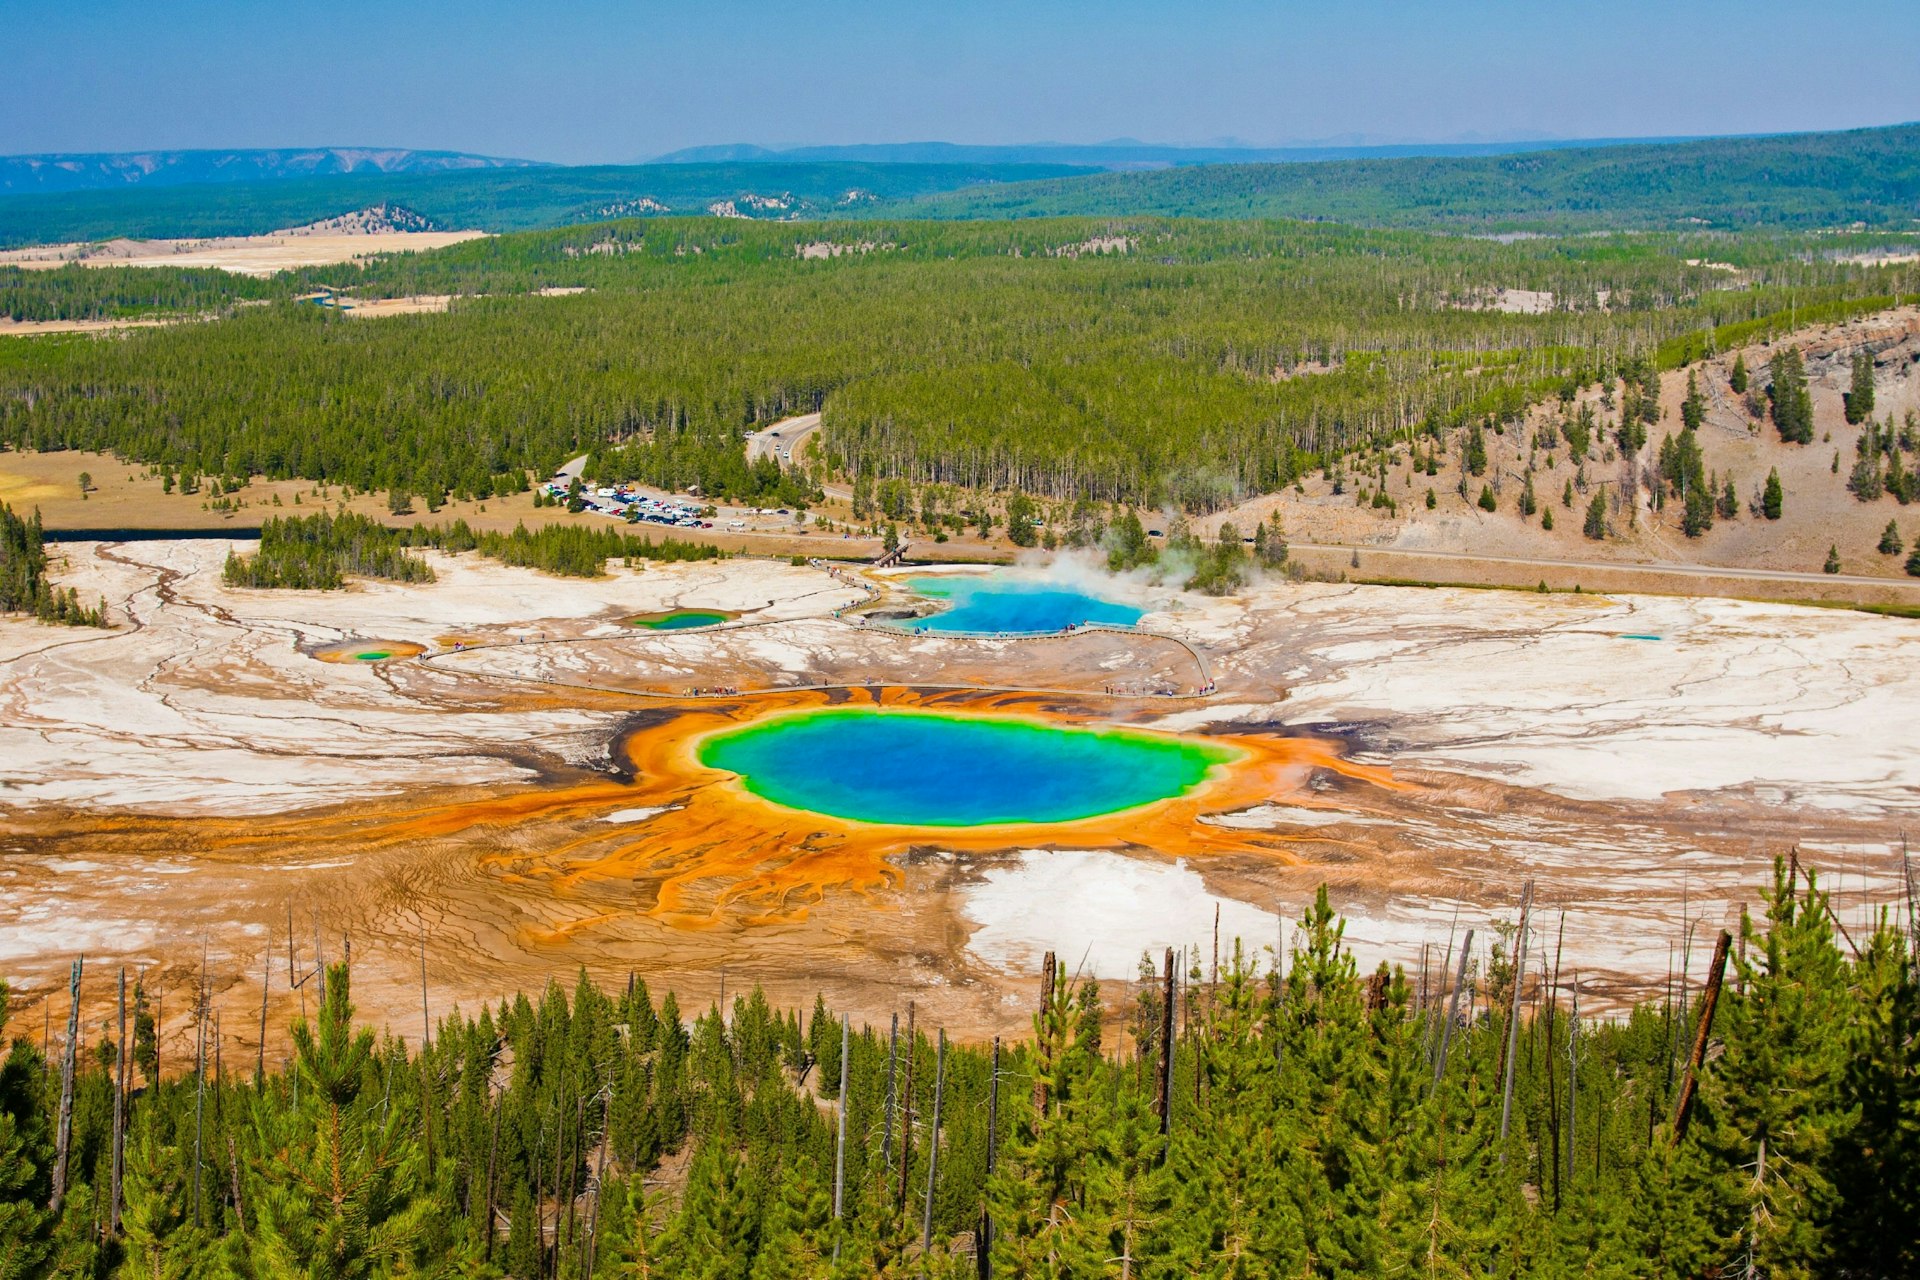 The Grand Prismatic Spring in Yellowstone National Park © Lorcel / Shutterstock